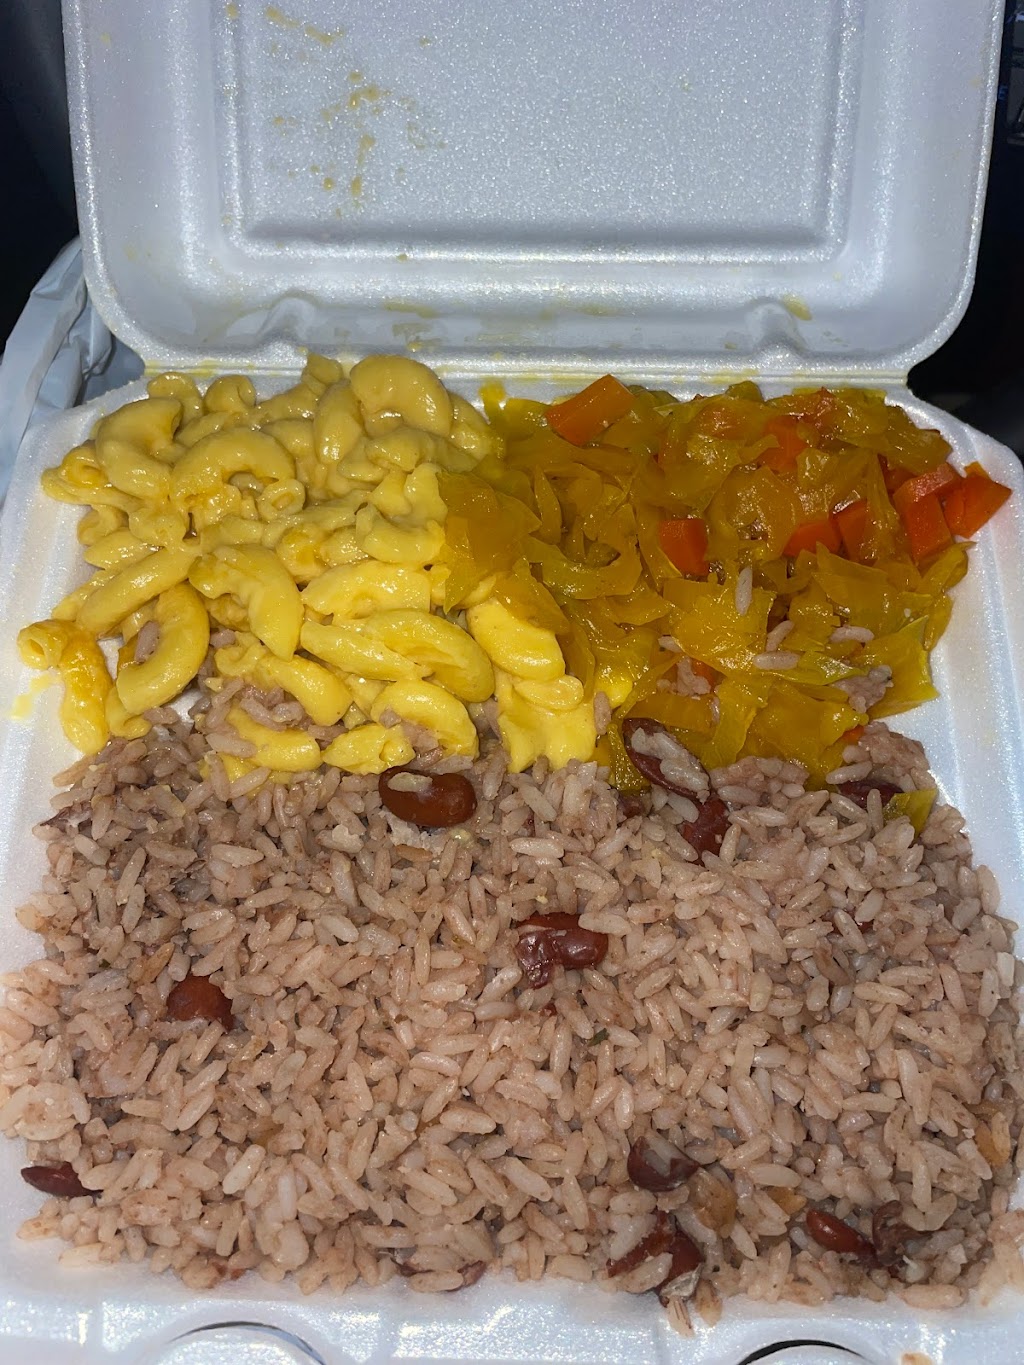 OBs Jamaican Restaurant | 920 W 2nd St, Chester, PA 19013 | Phone: (610) 874-4530